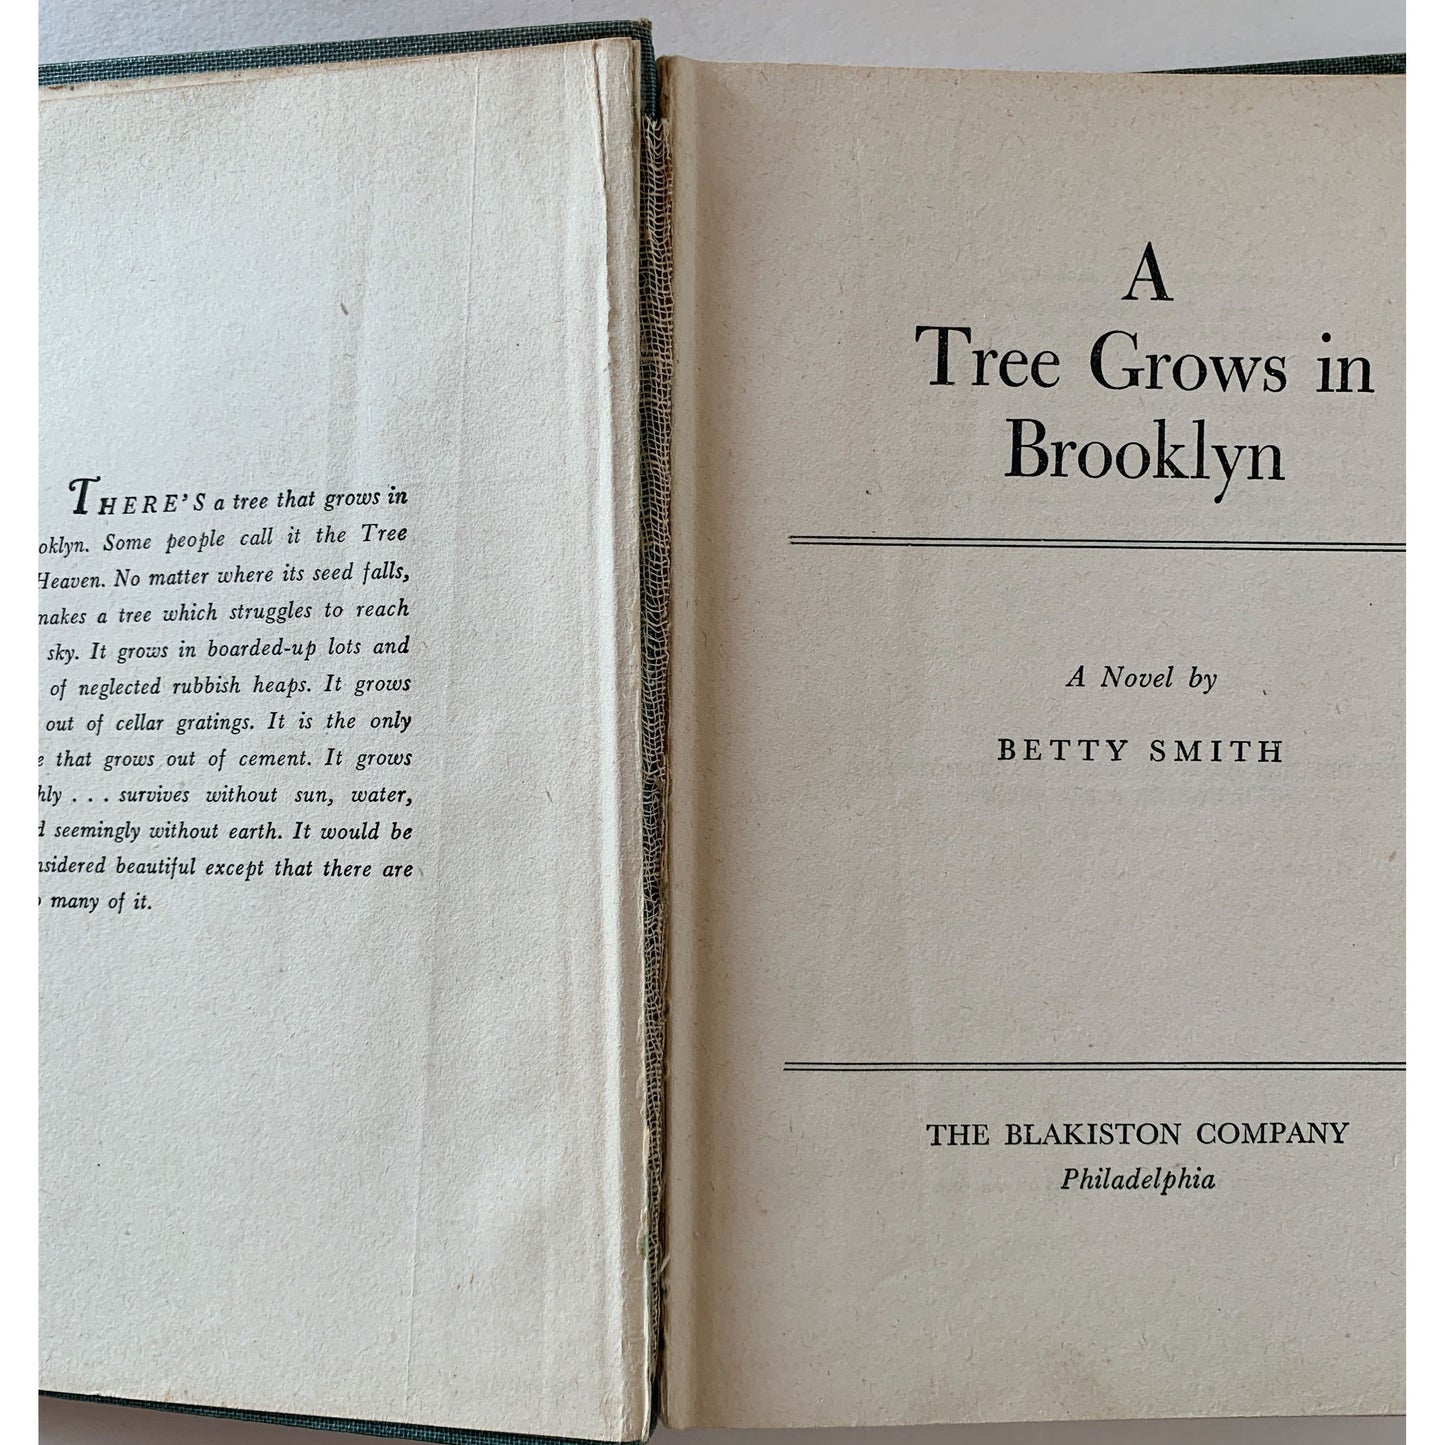 A Tree Grows in Brooklyn, Betty Smith, 1943 Vintage Hardcover